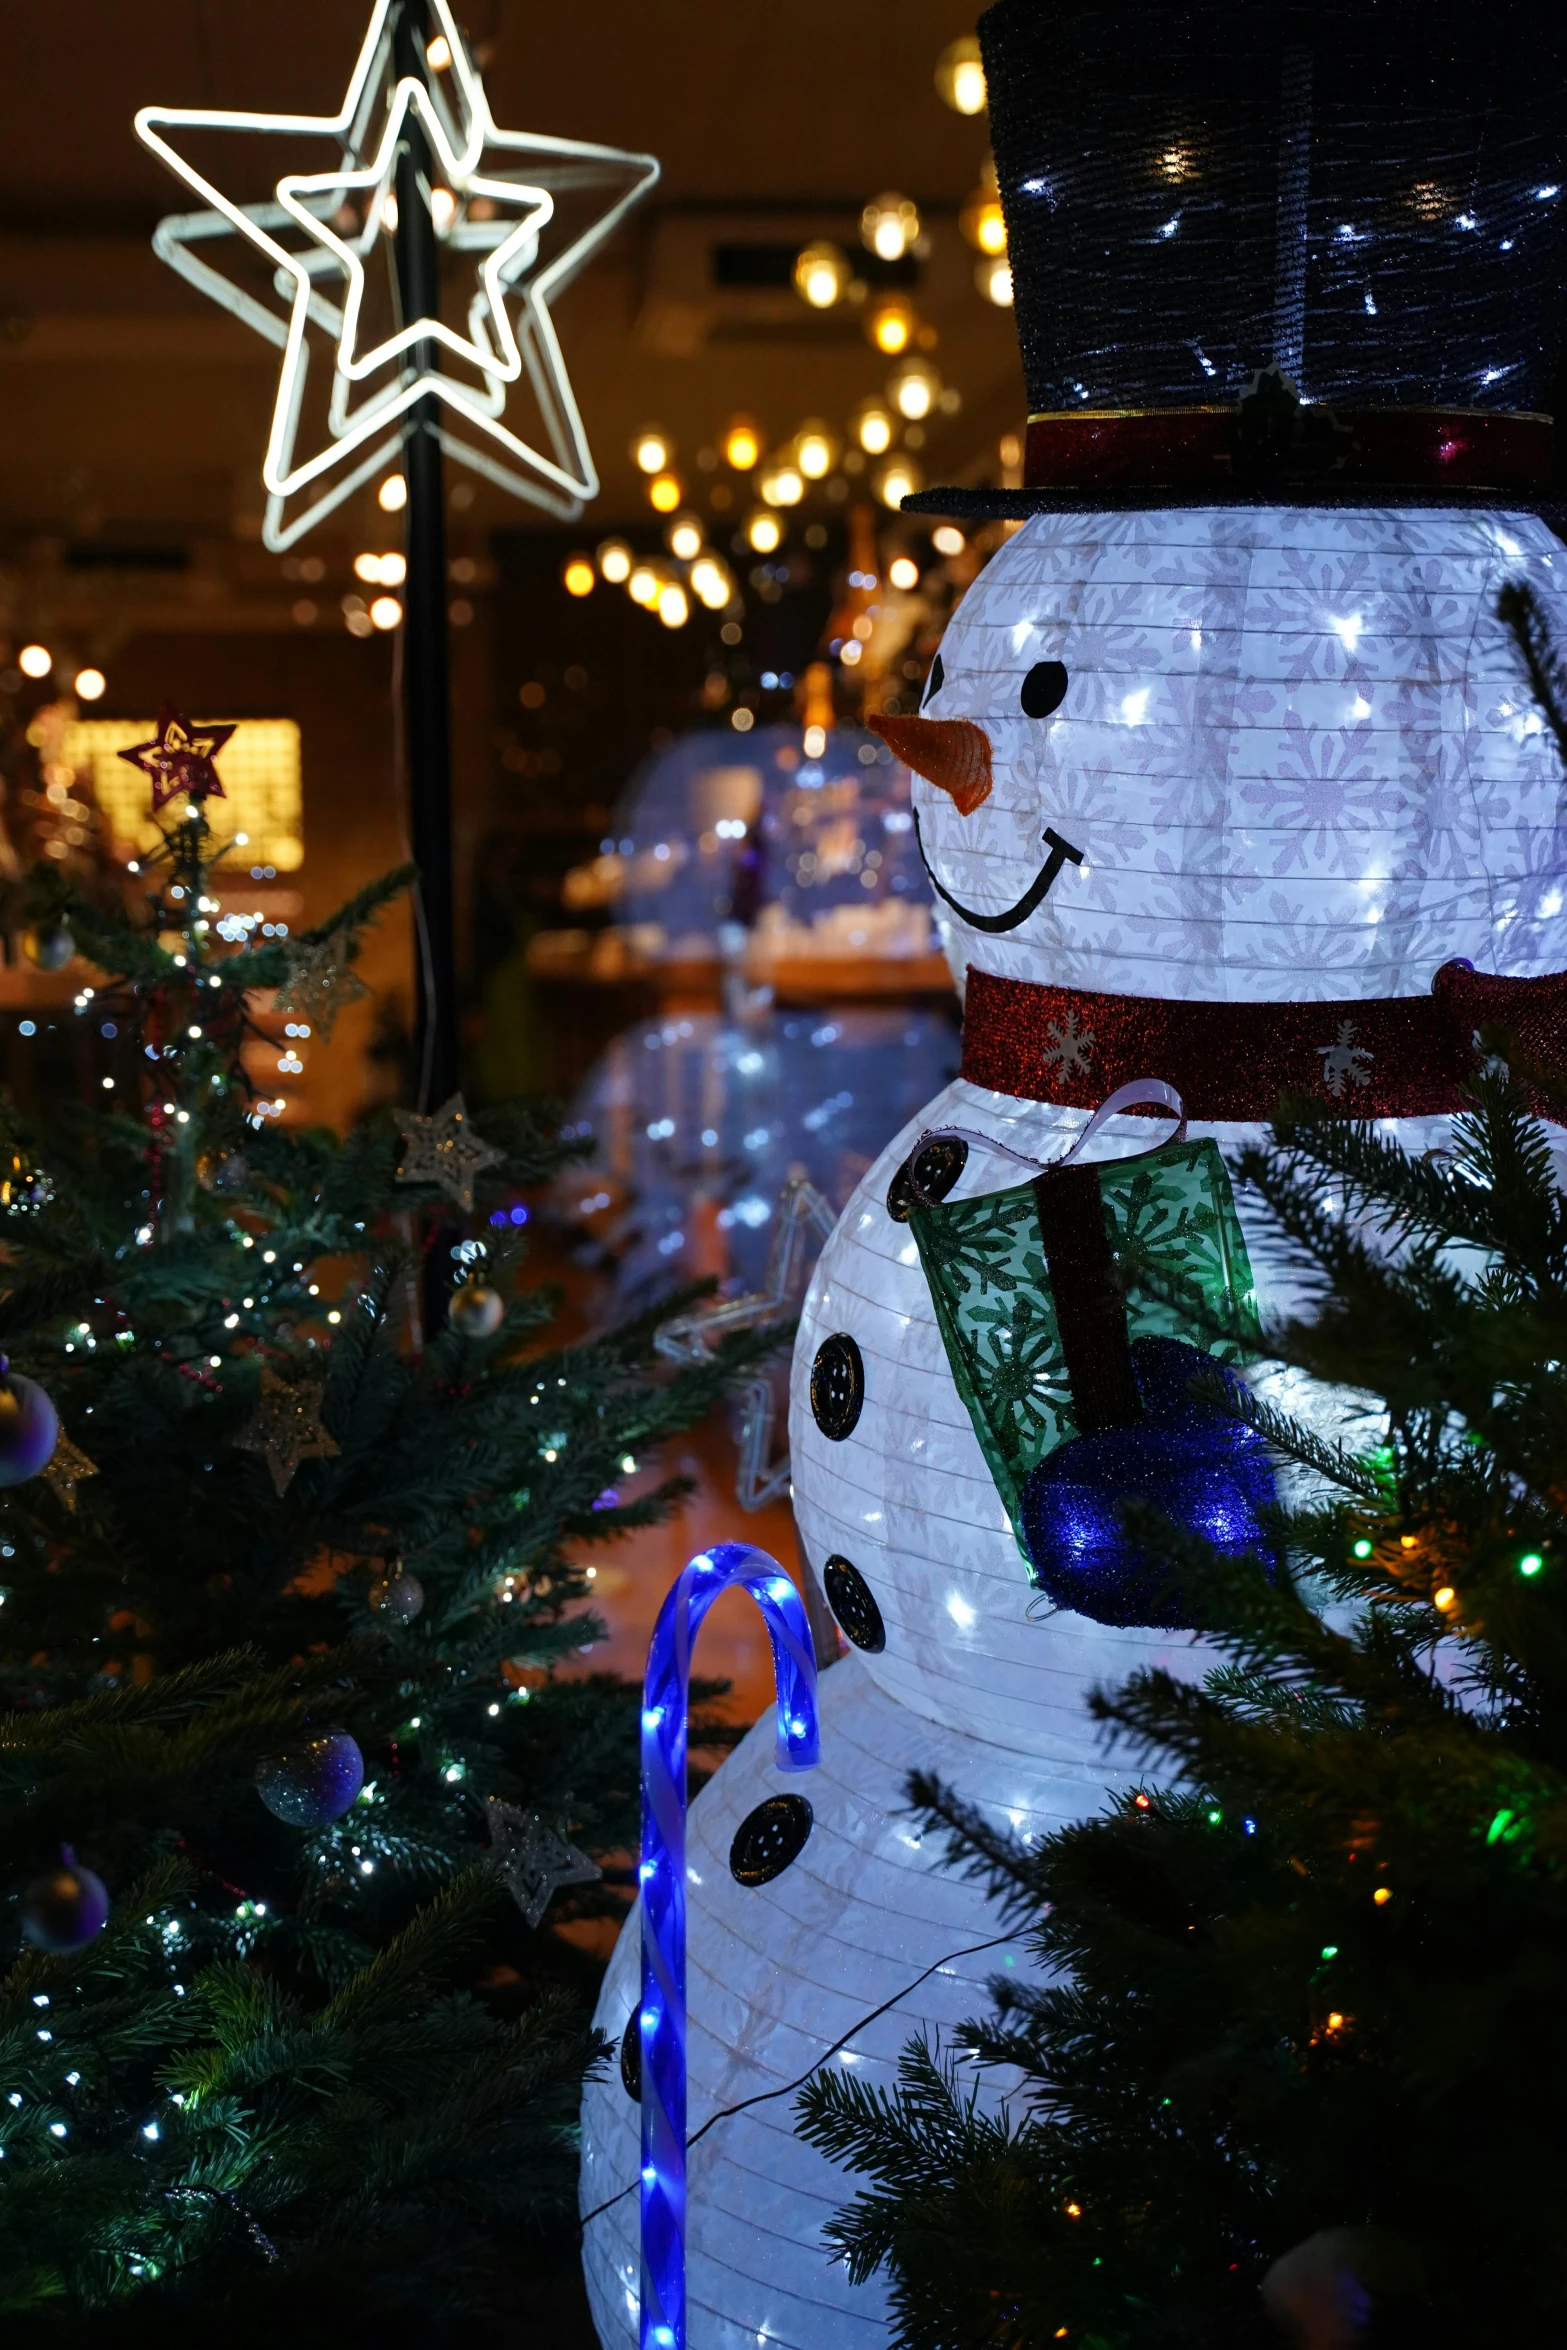 a lit up snowman next to some christmas trees